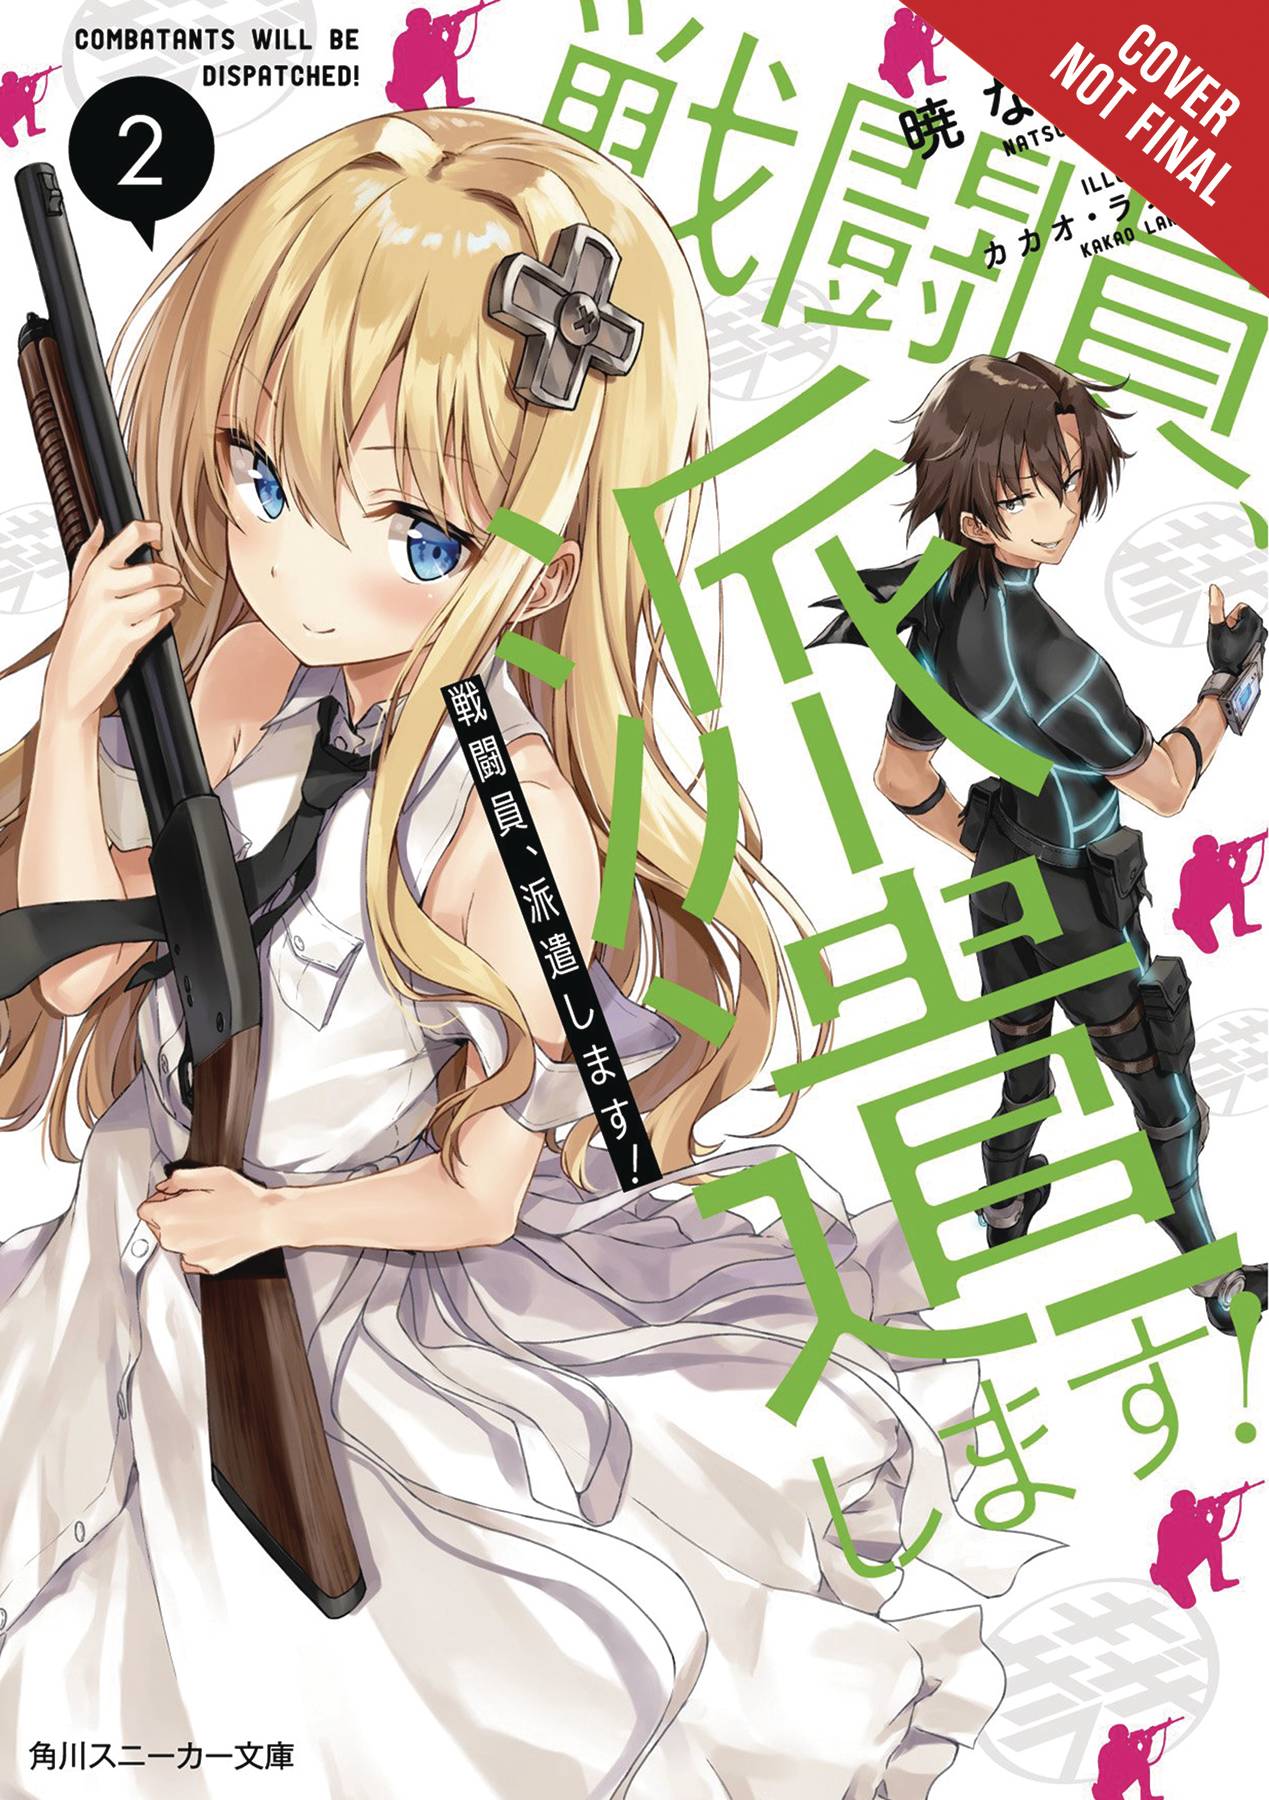 Combatants Will Be Dispatched Light Novel Volume 2